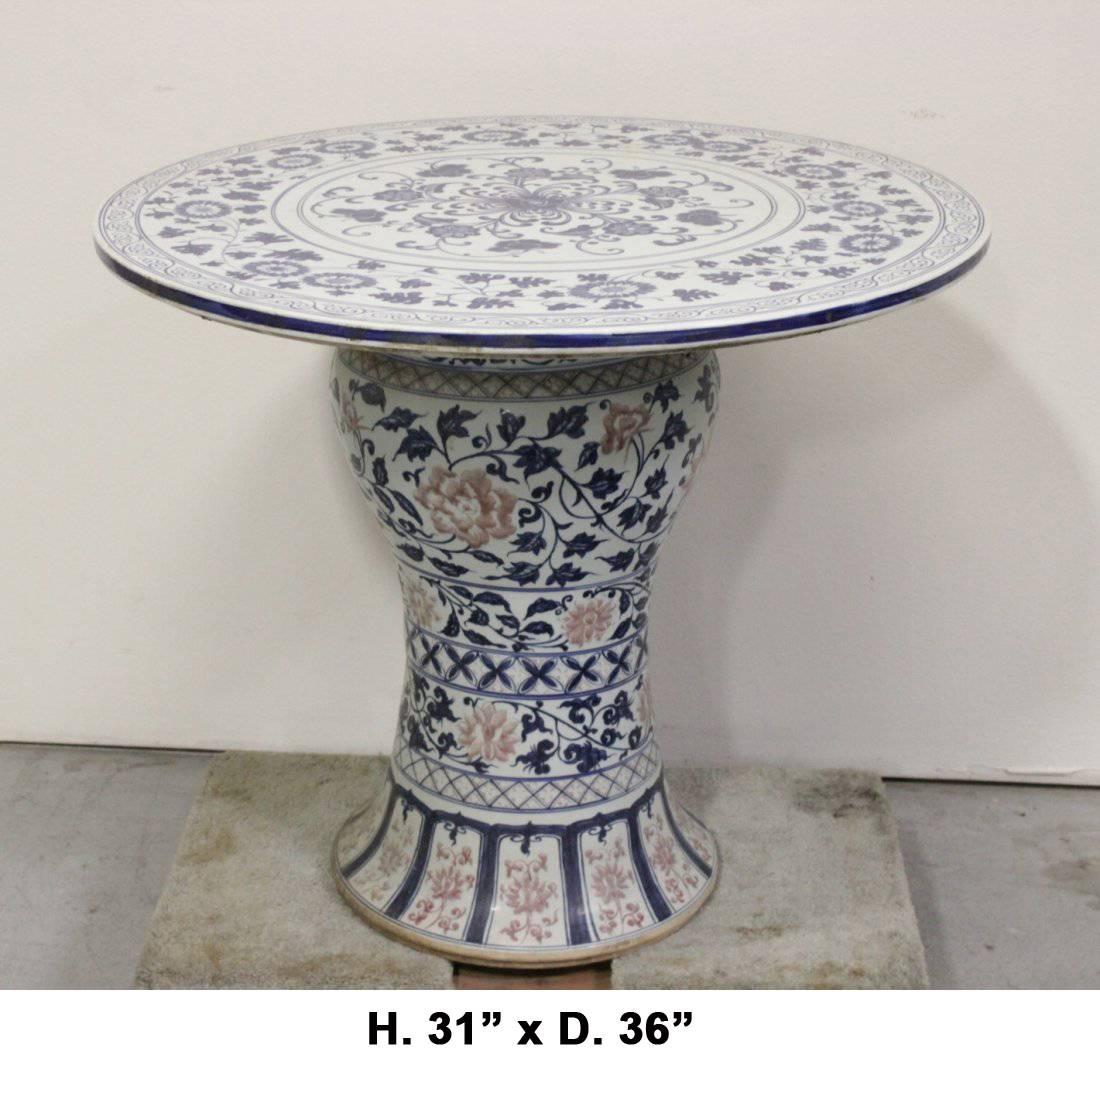 Large and rare Chinese finely hand-painted blue and white porcelain round table. Floral and leaf decorated round top on hand-painted porcelain base.

 Very rare to find a blue and white porcelain table. 

 